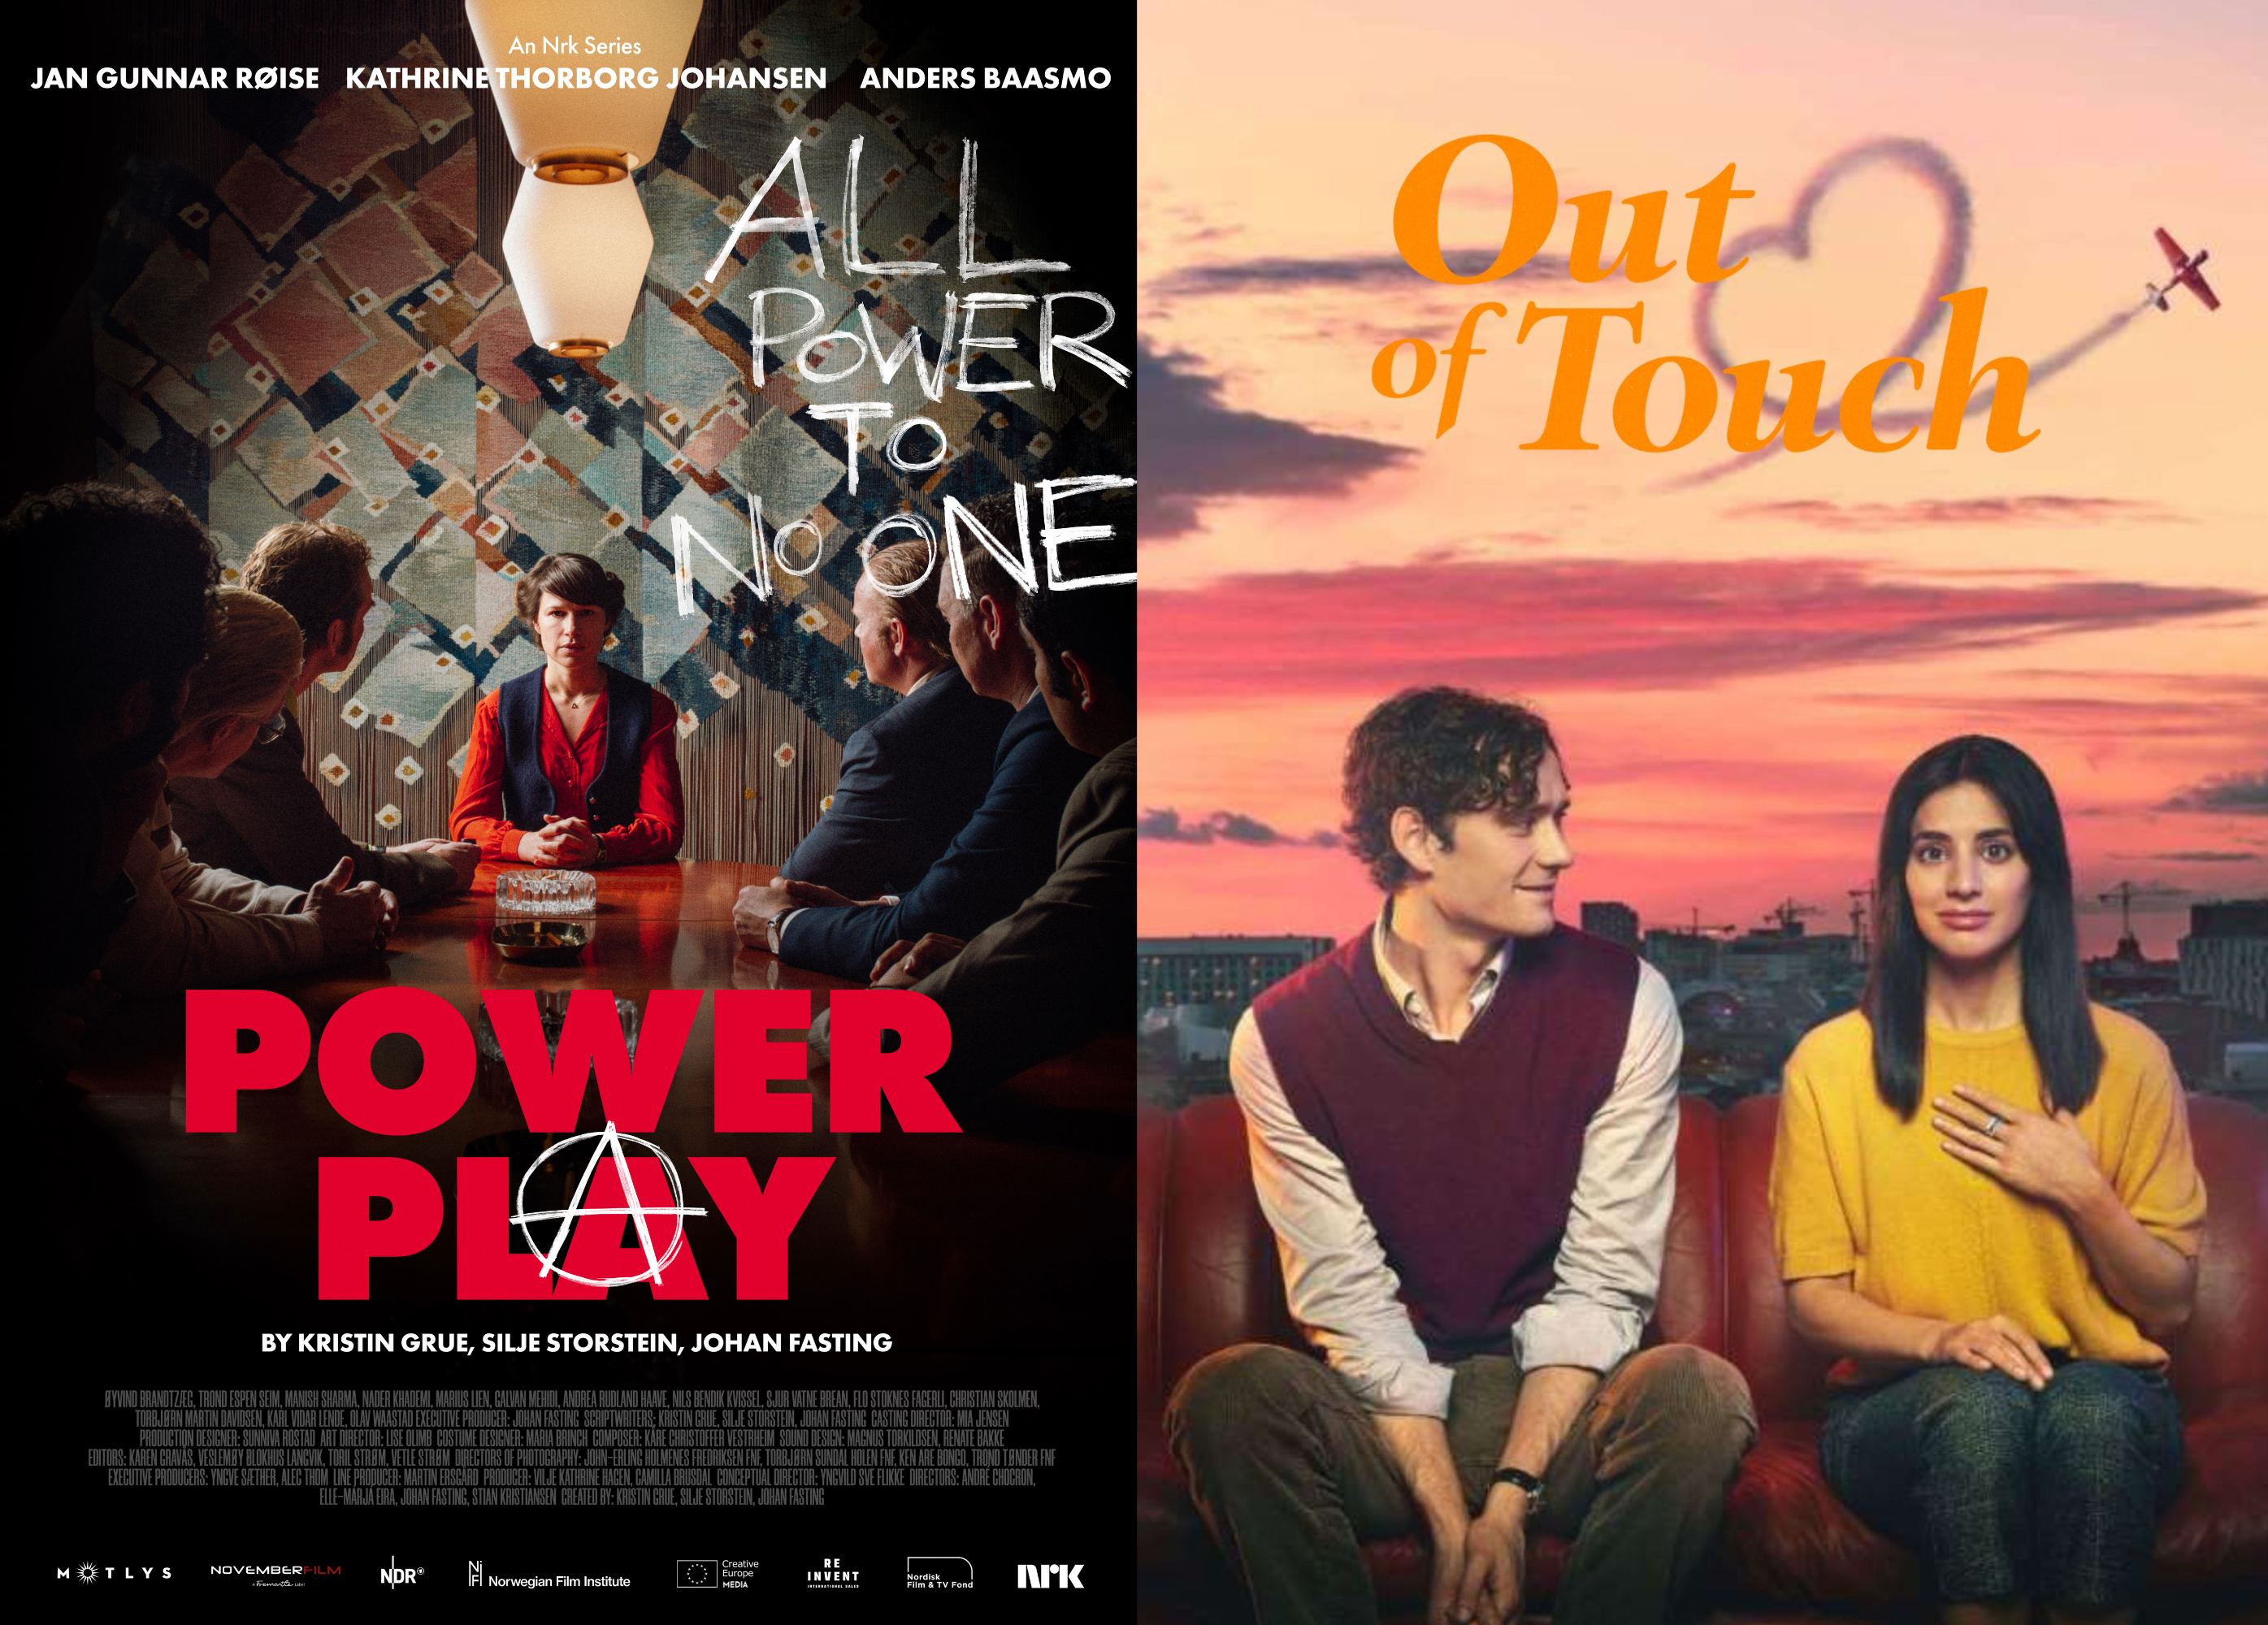 POWER PLAY AND OUT OF TOUCH SELECTED FOR CANNESERIES